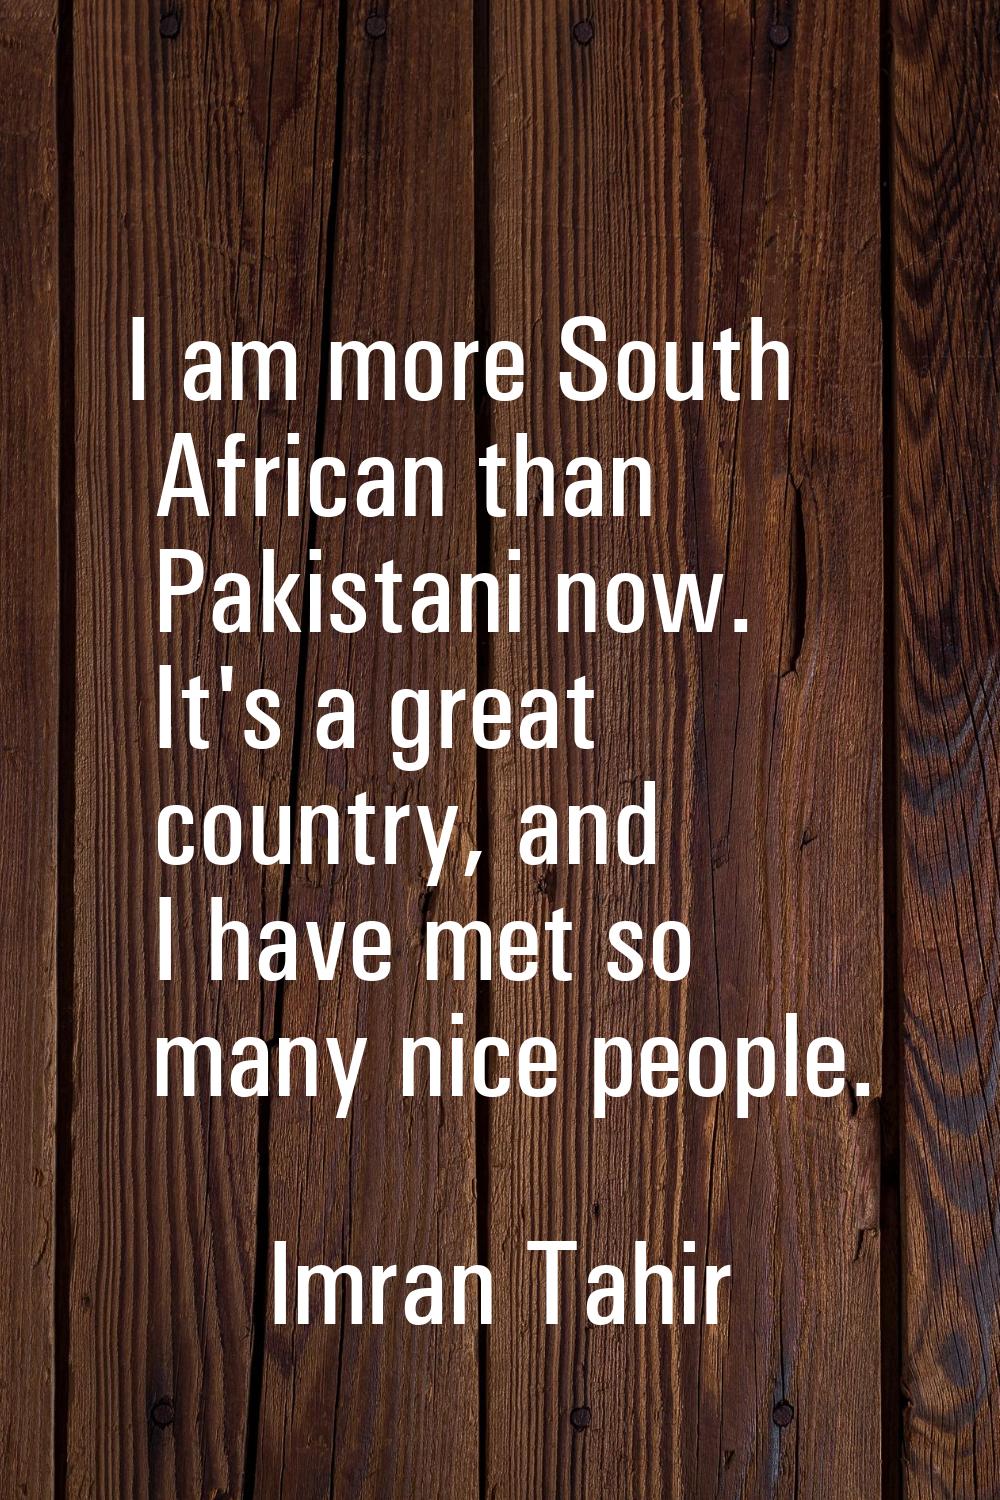 I am more South African than Pakistani now. It's a great country, and I have met so many nice peopl